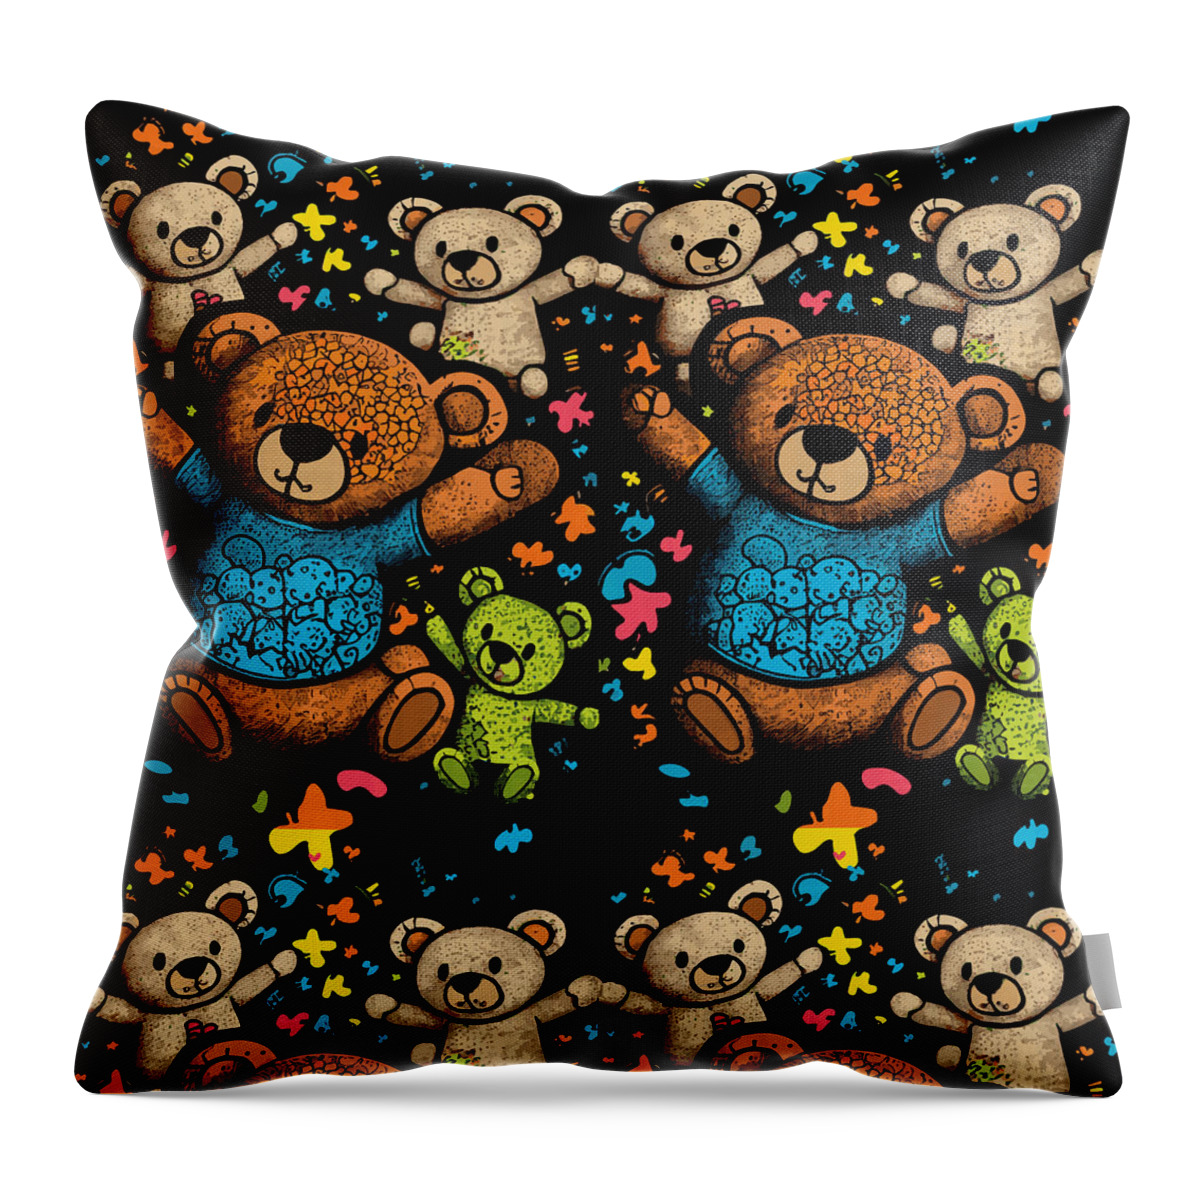 Series Throw Pillow featuring the digital art Teddies and balloons seamless pattern #1 by Sabantha